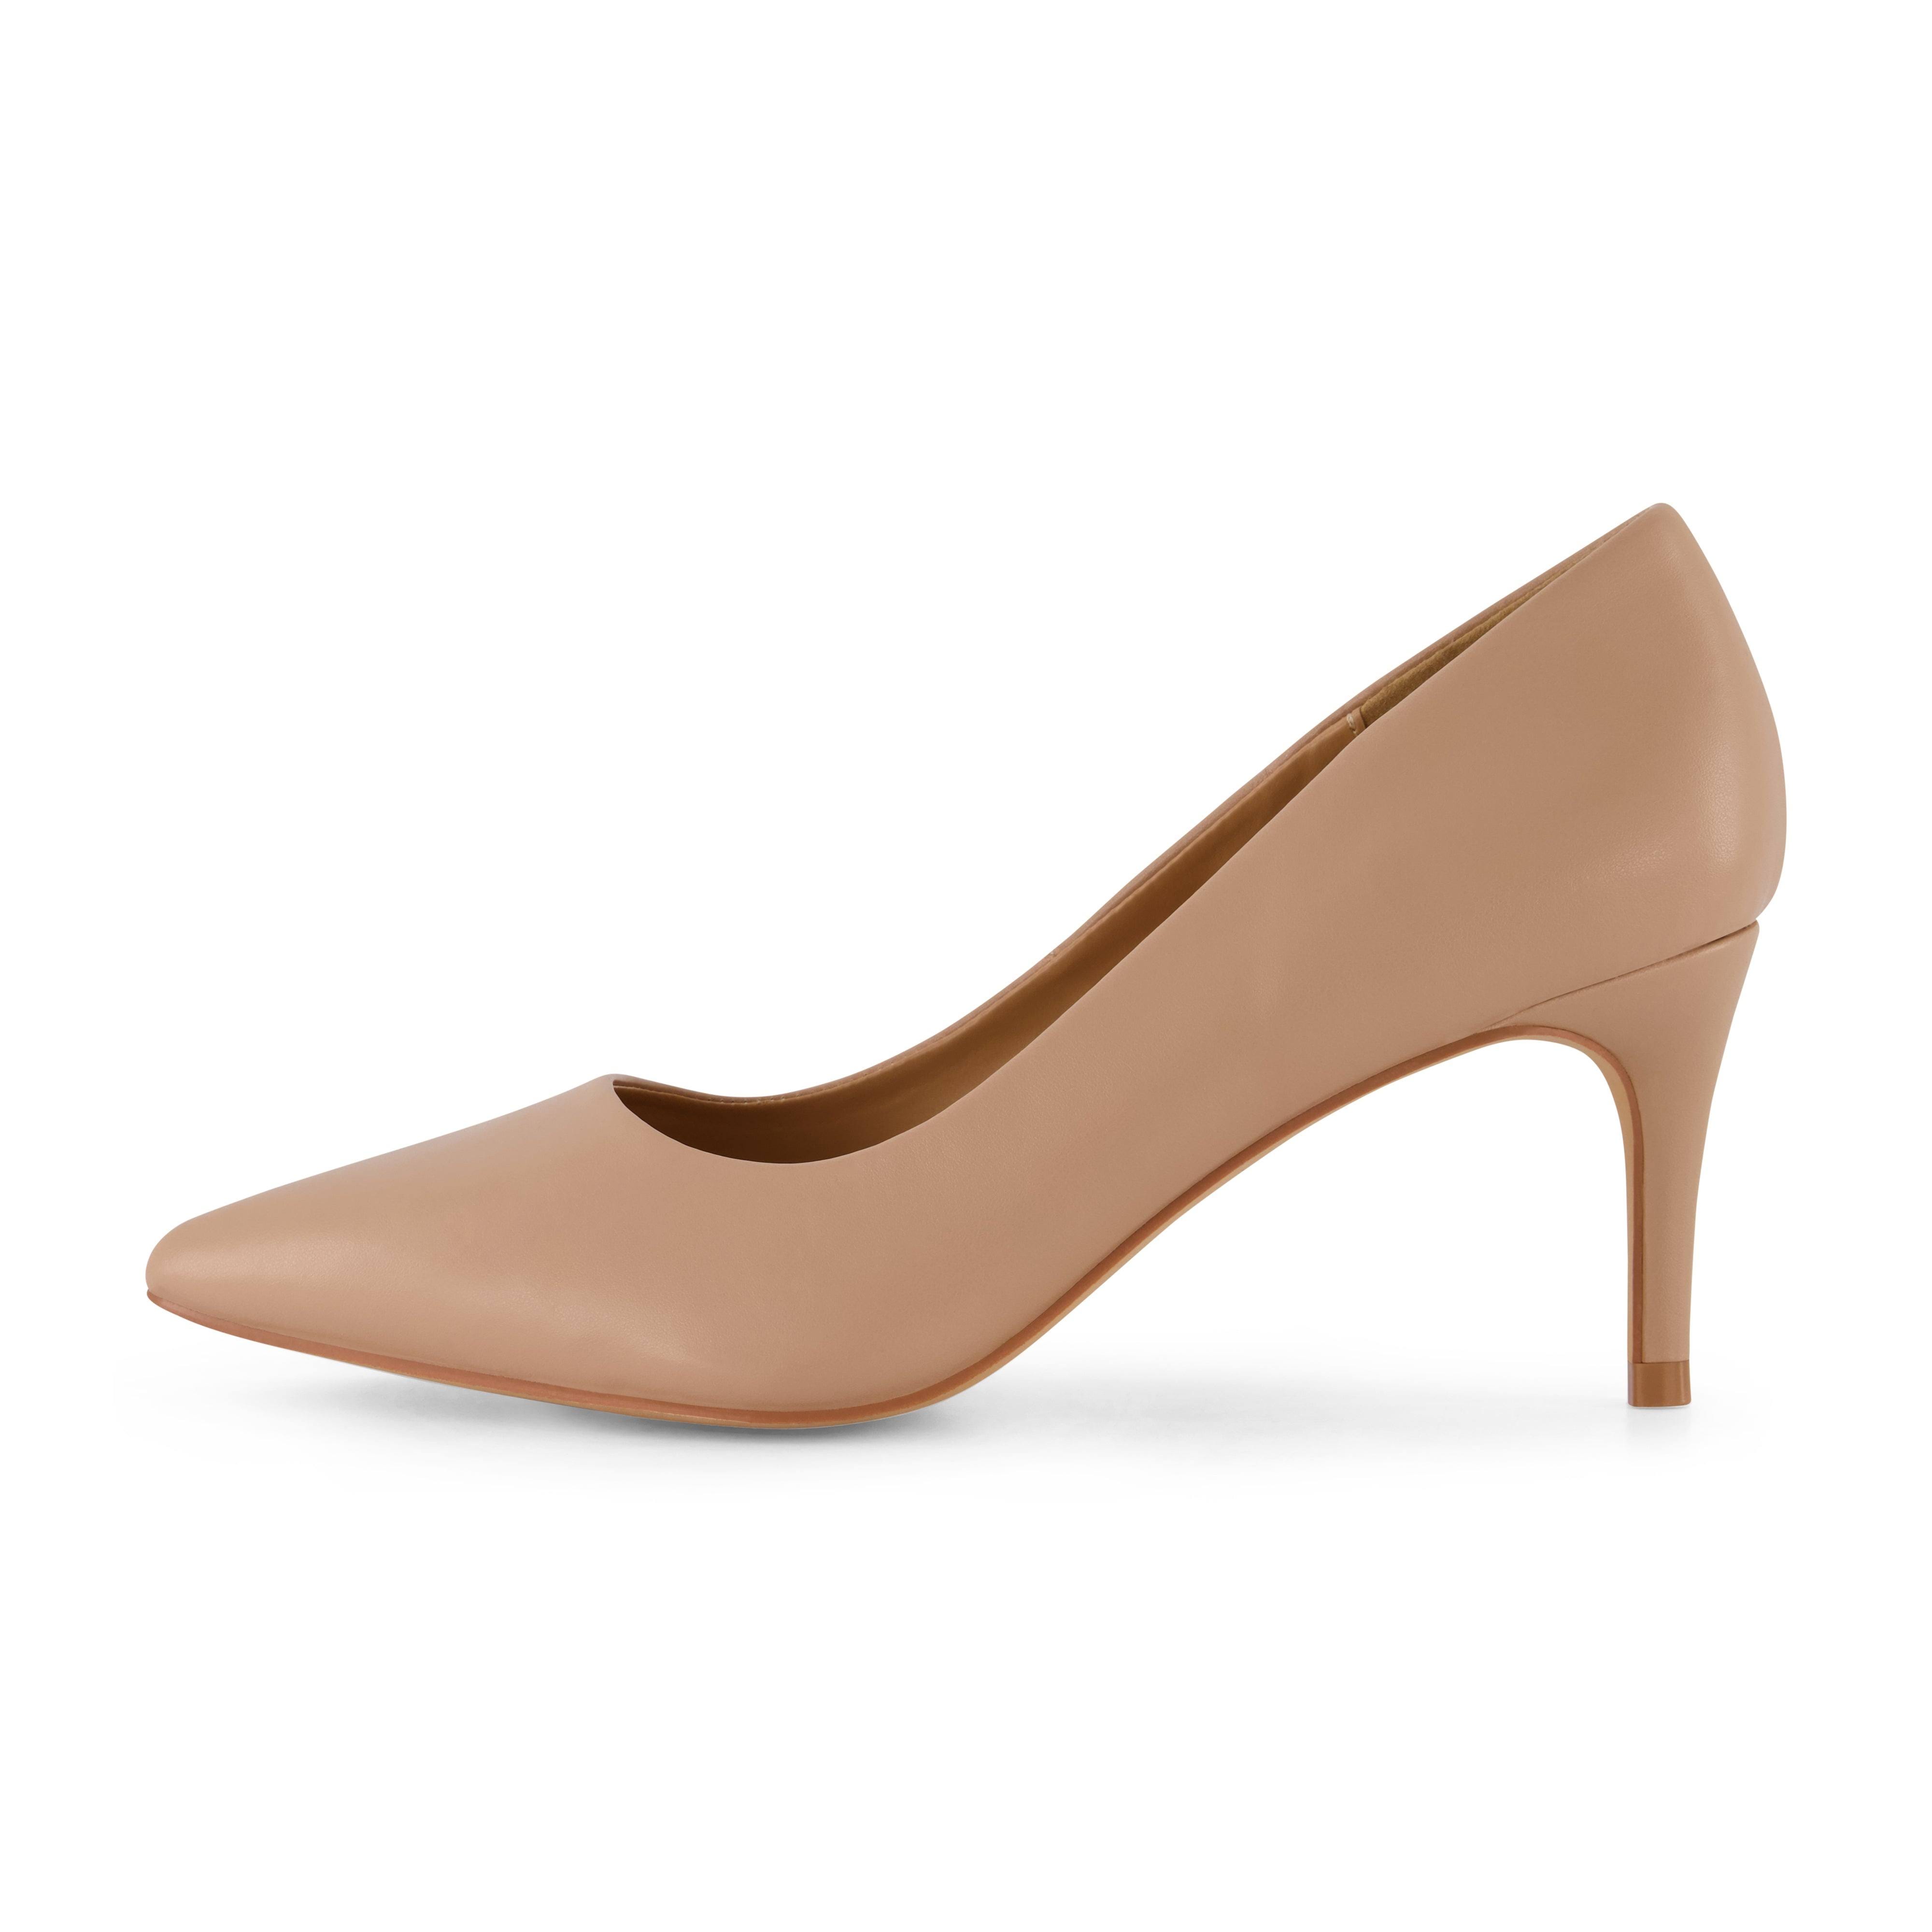 Comfortable Evening Pump with Vegan Leather and Memory Foam | Image